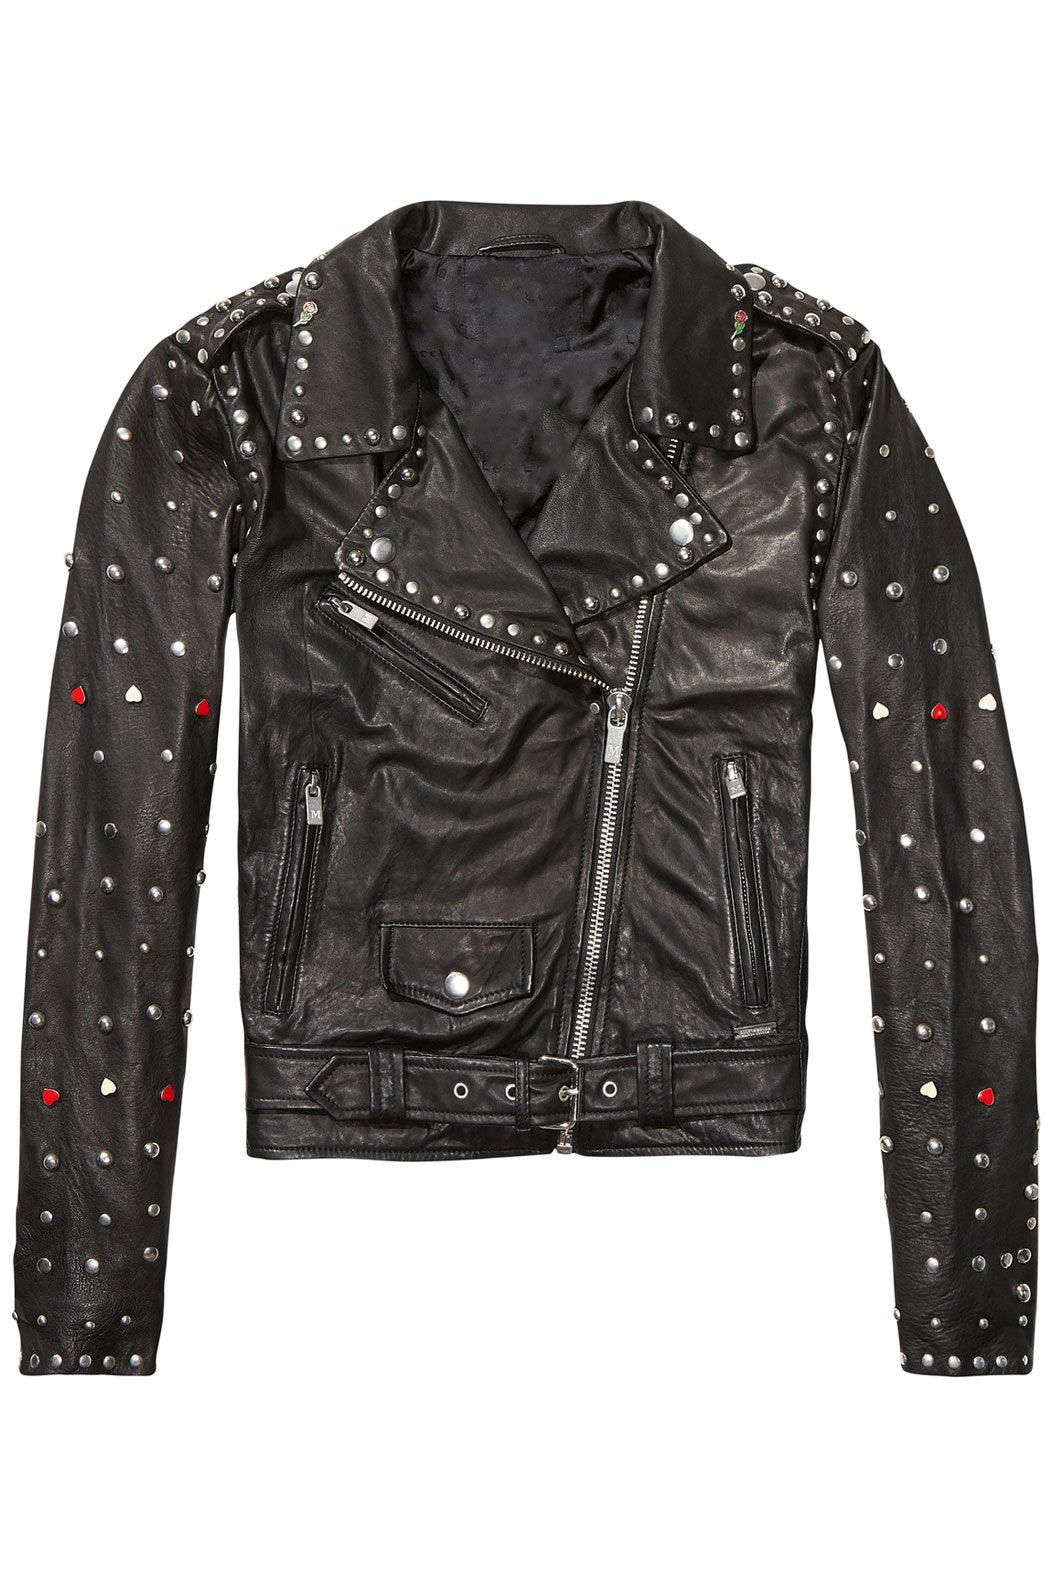 Black Women Spiked Studded Leather Motorcycle Jacket - Leather Loom